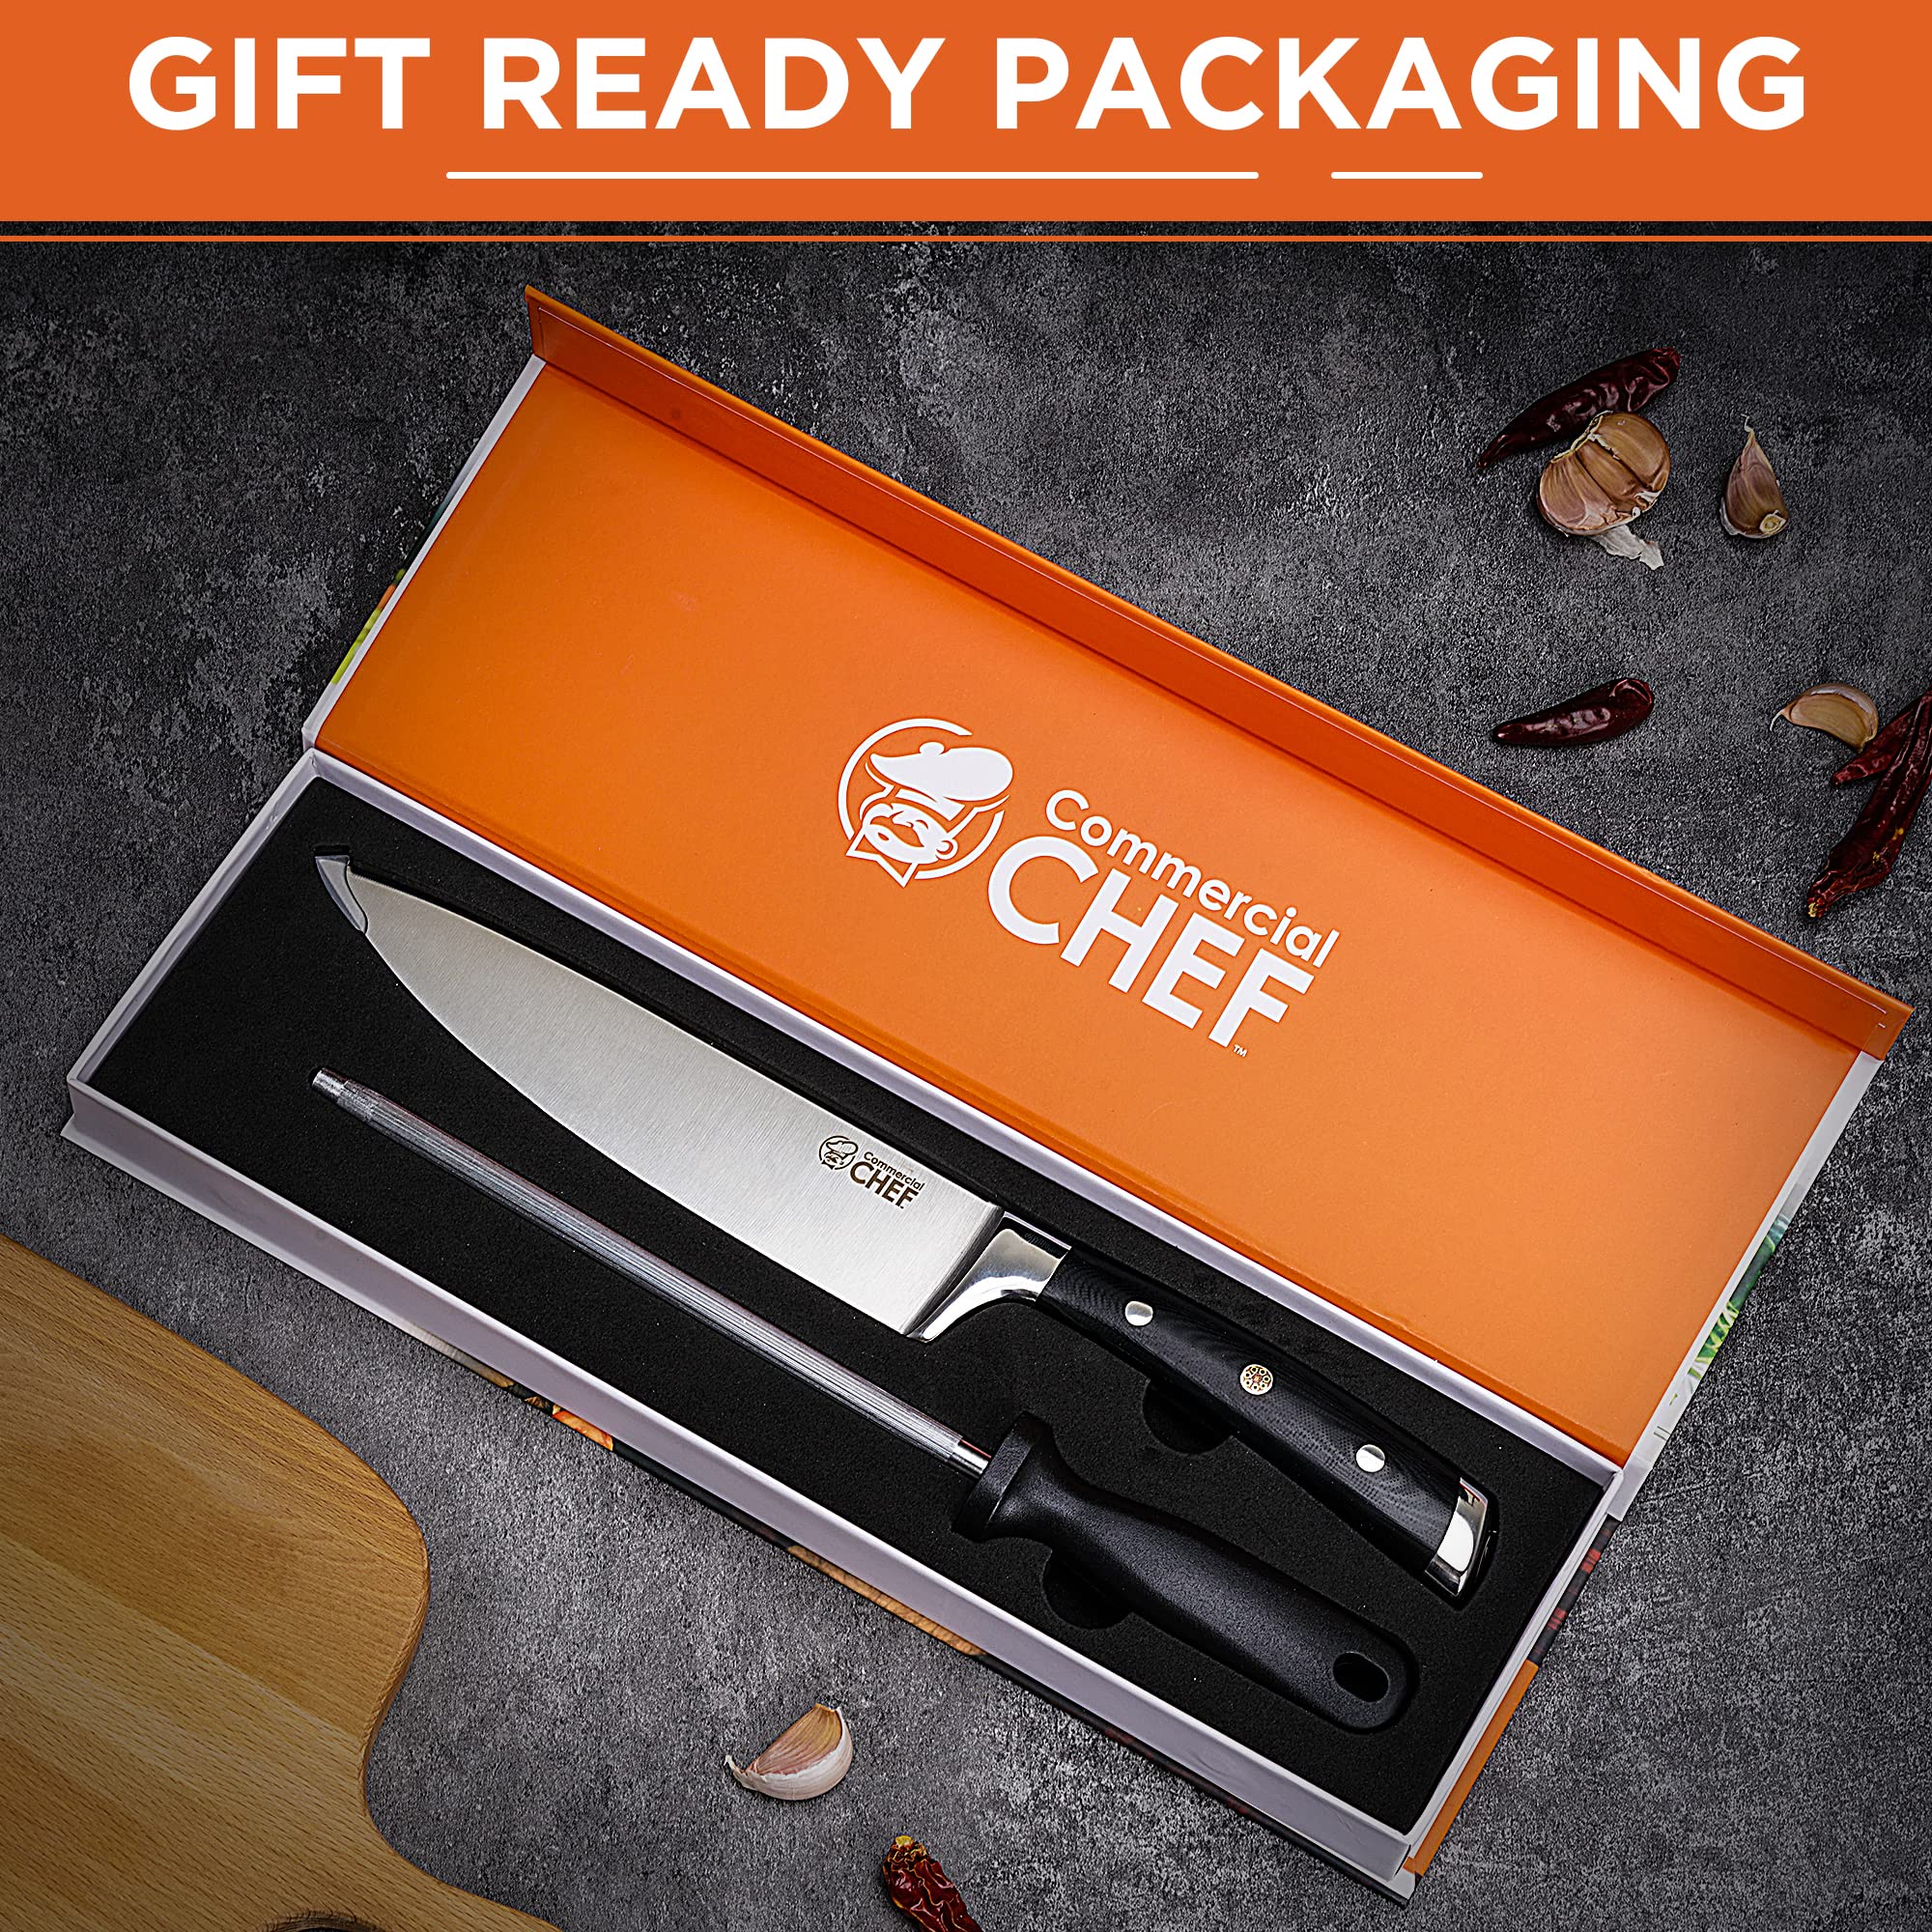 Commercial CHEF Professional Chef Knife with Sharpener - 8 Inch Chef's Knives - Well Balanced Full Tang Ultra Sharp Kitchen Knife - High Carbon Stainless Steel - Long Lasting Cooking Knife - Gift Box